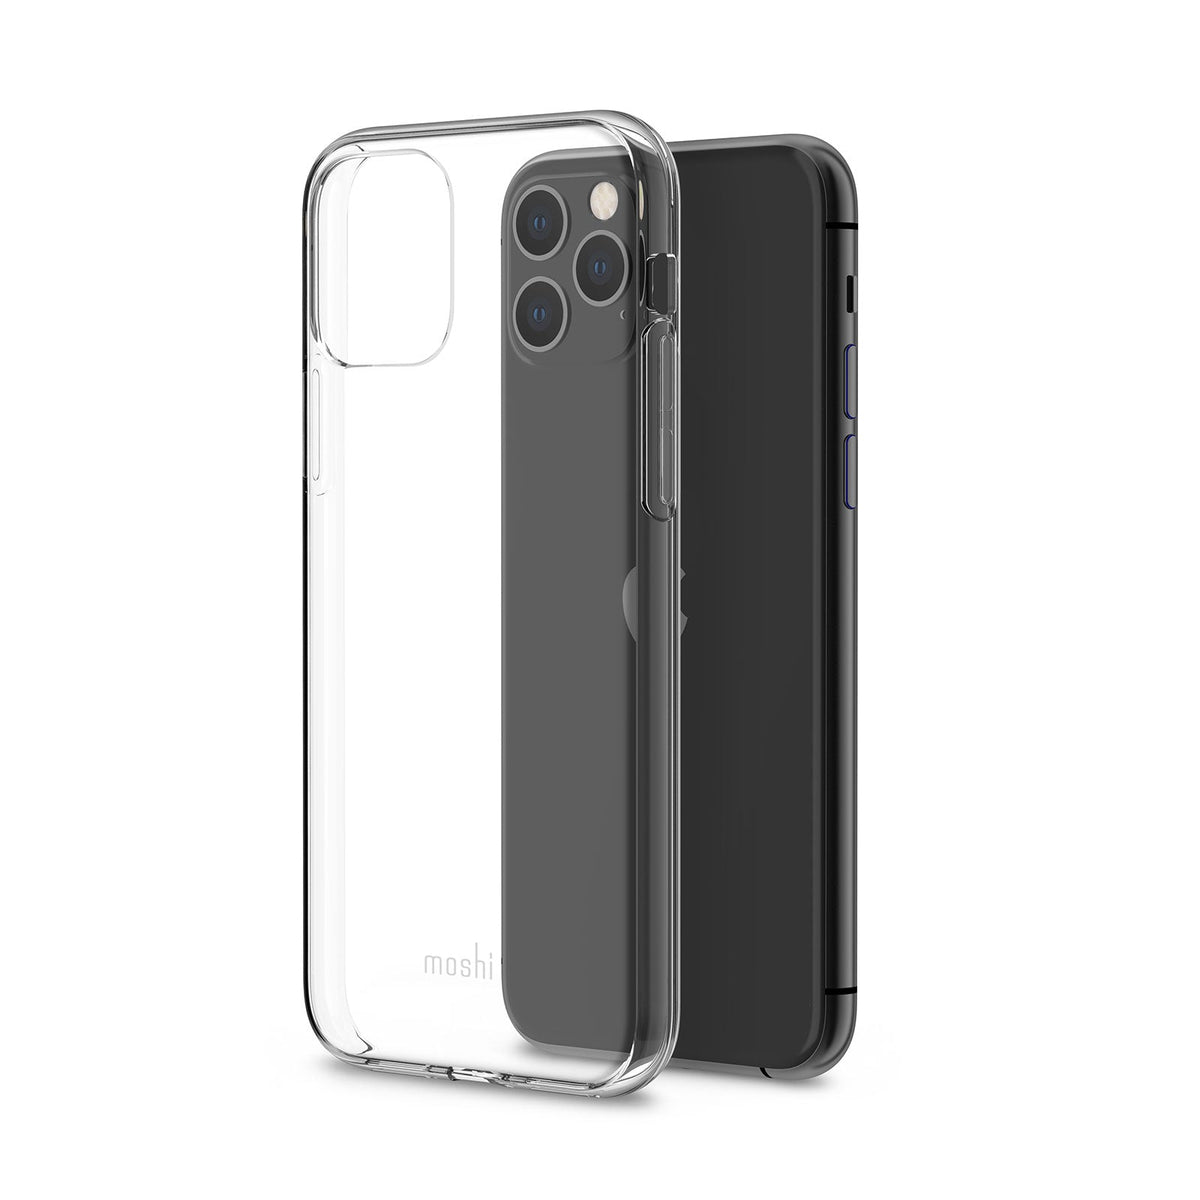 [OPEN BOX] MOSHI Vitros Case for iPhone 11 Pro - Crystal Clear